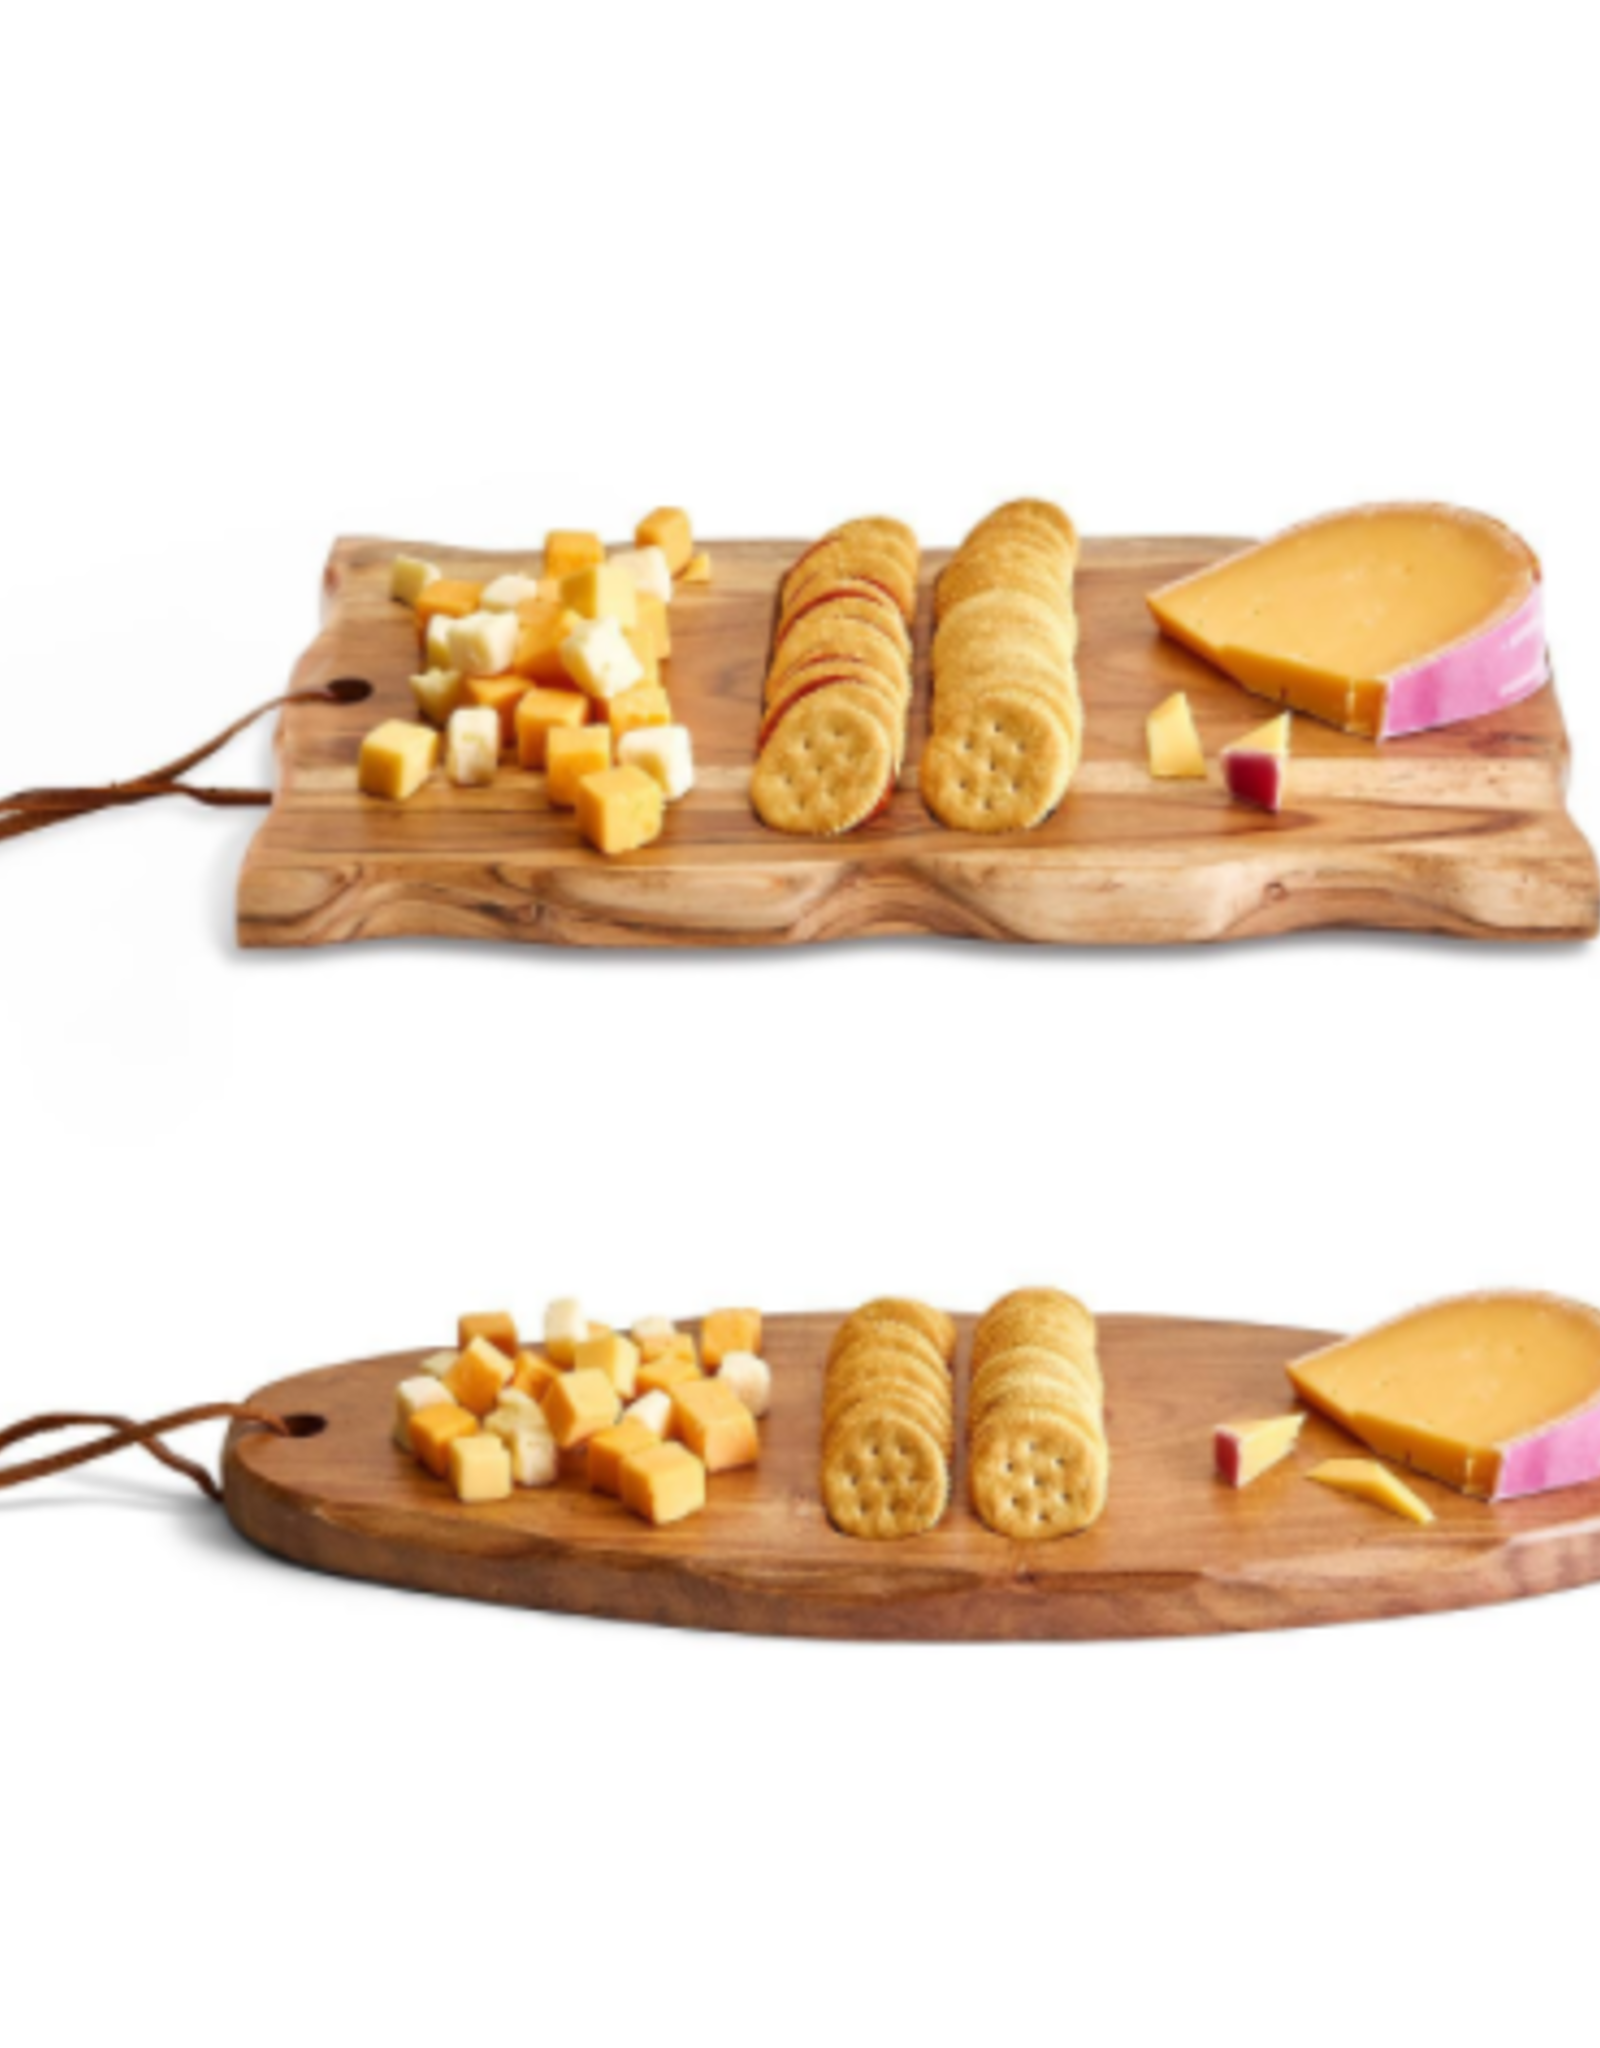 Two's Comapany Wooden Cheese Board w/ Cracker Divot